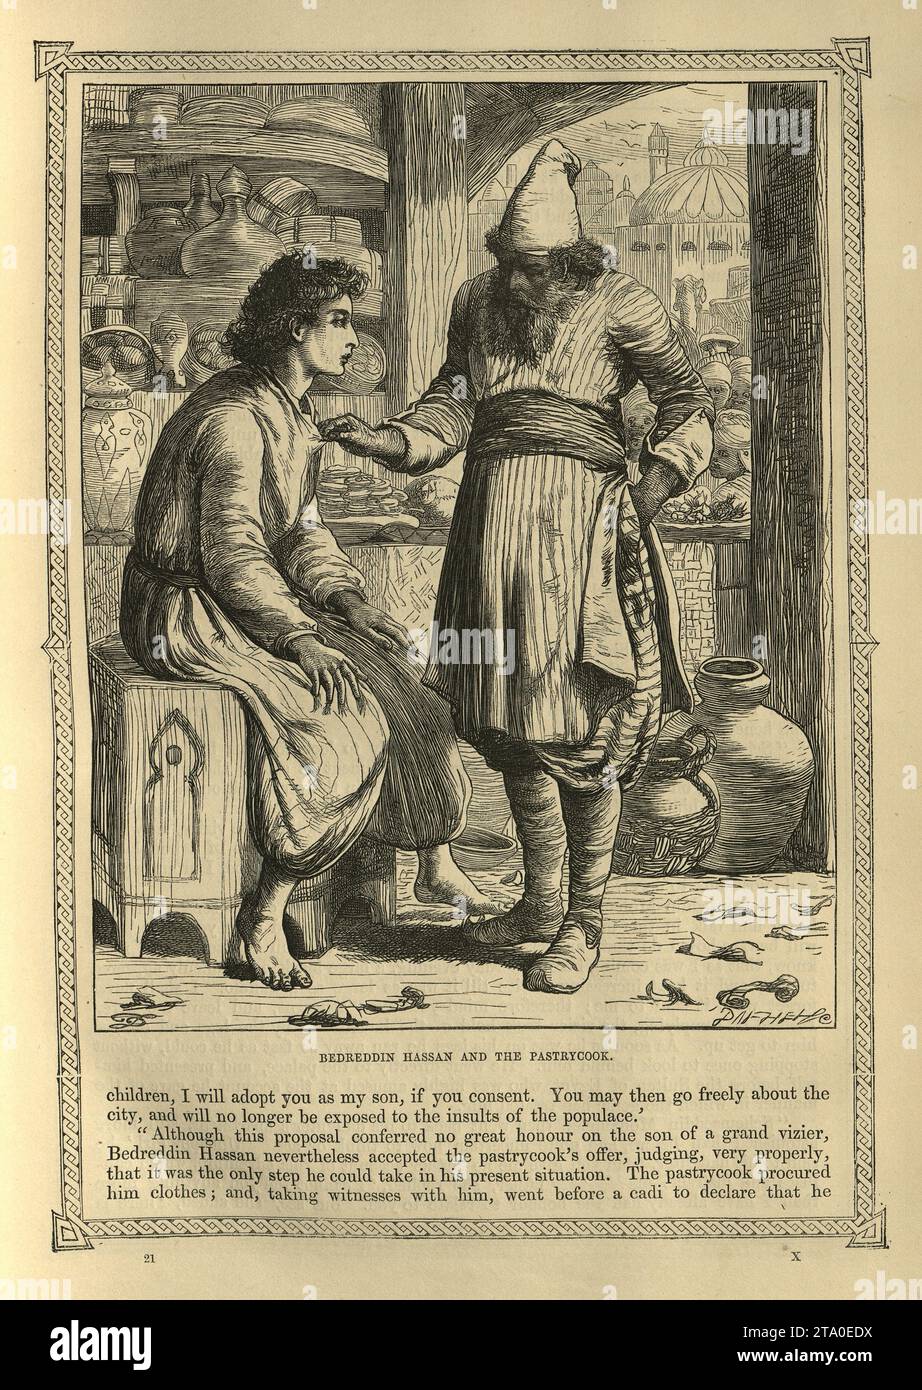 Vintage illustration One Thousand and One Nights, Bedreddin Hassan and the pastrycook, Arabian, Middle Eastern folktales, by The Brothers Dalziel. History of Noureddin Ali and Bedreddin Hassan Stock Photo